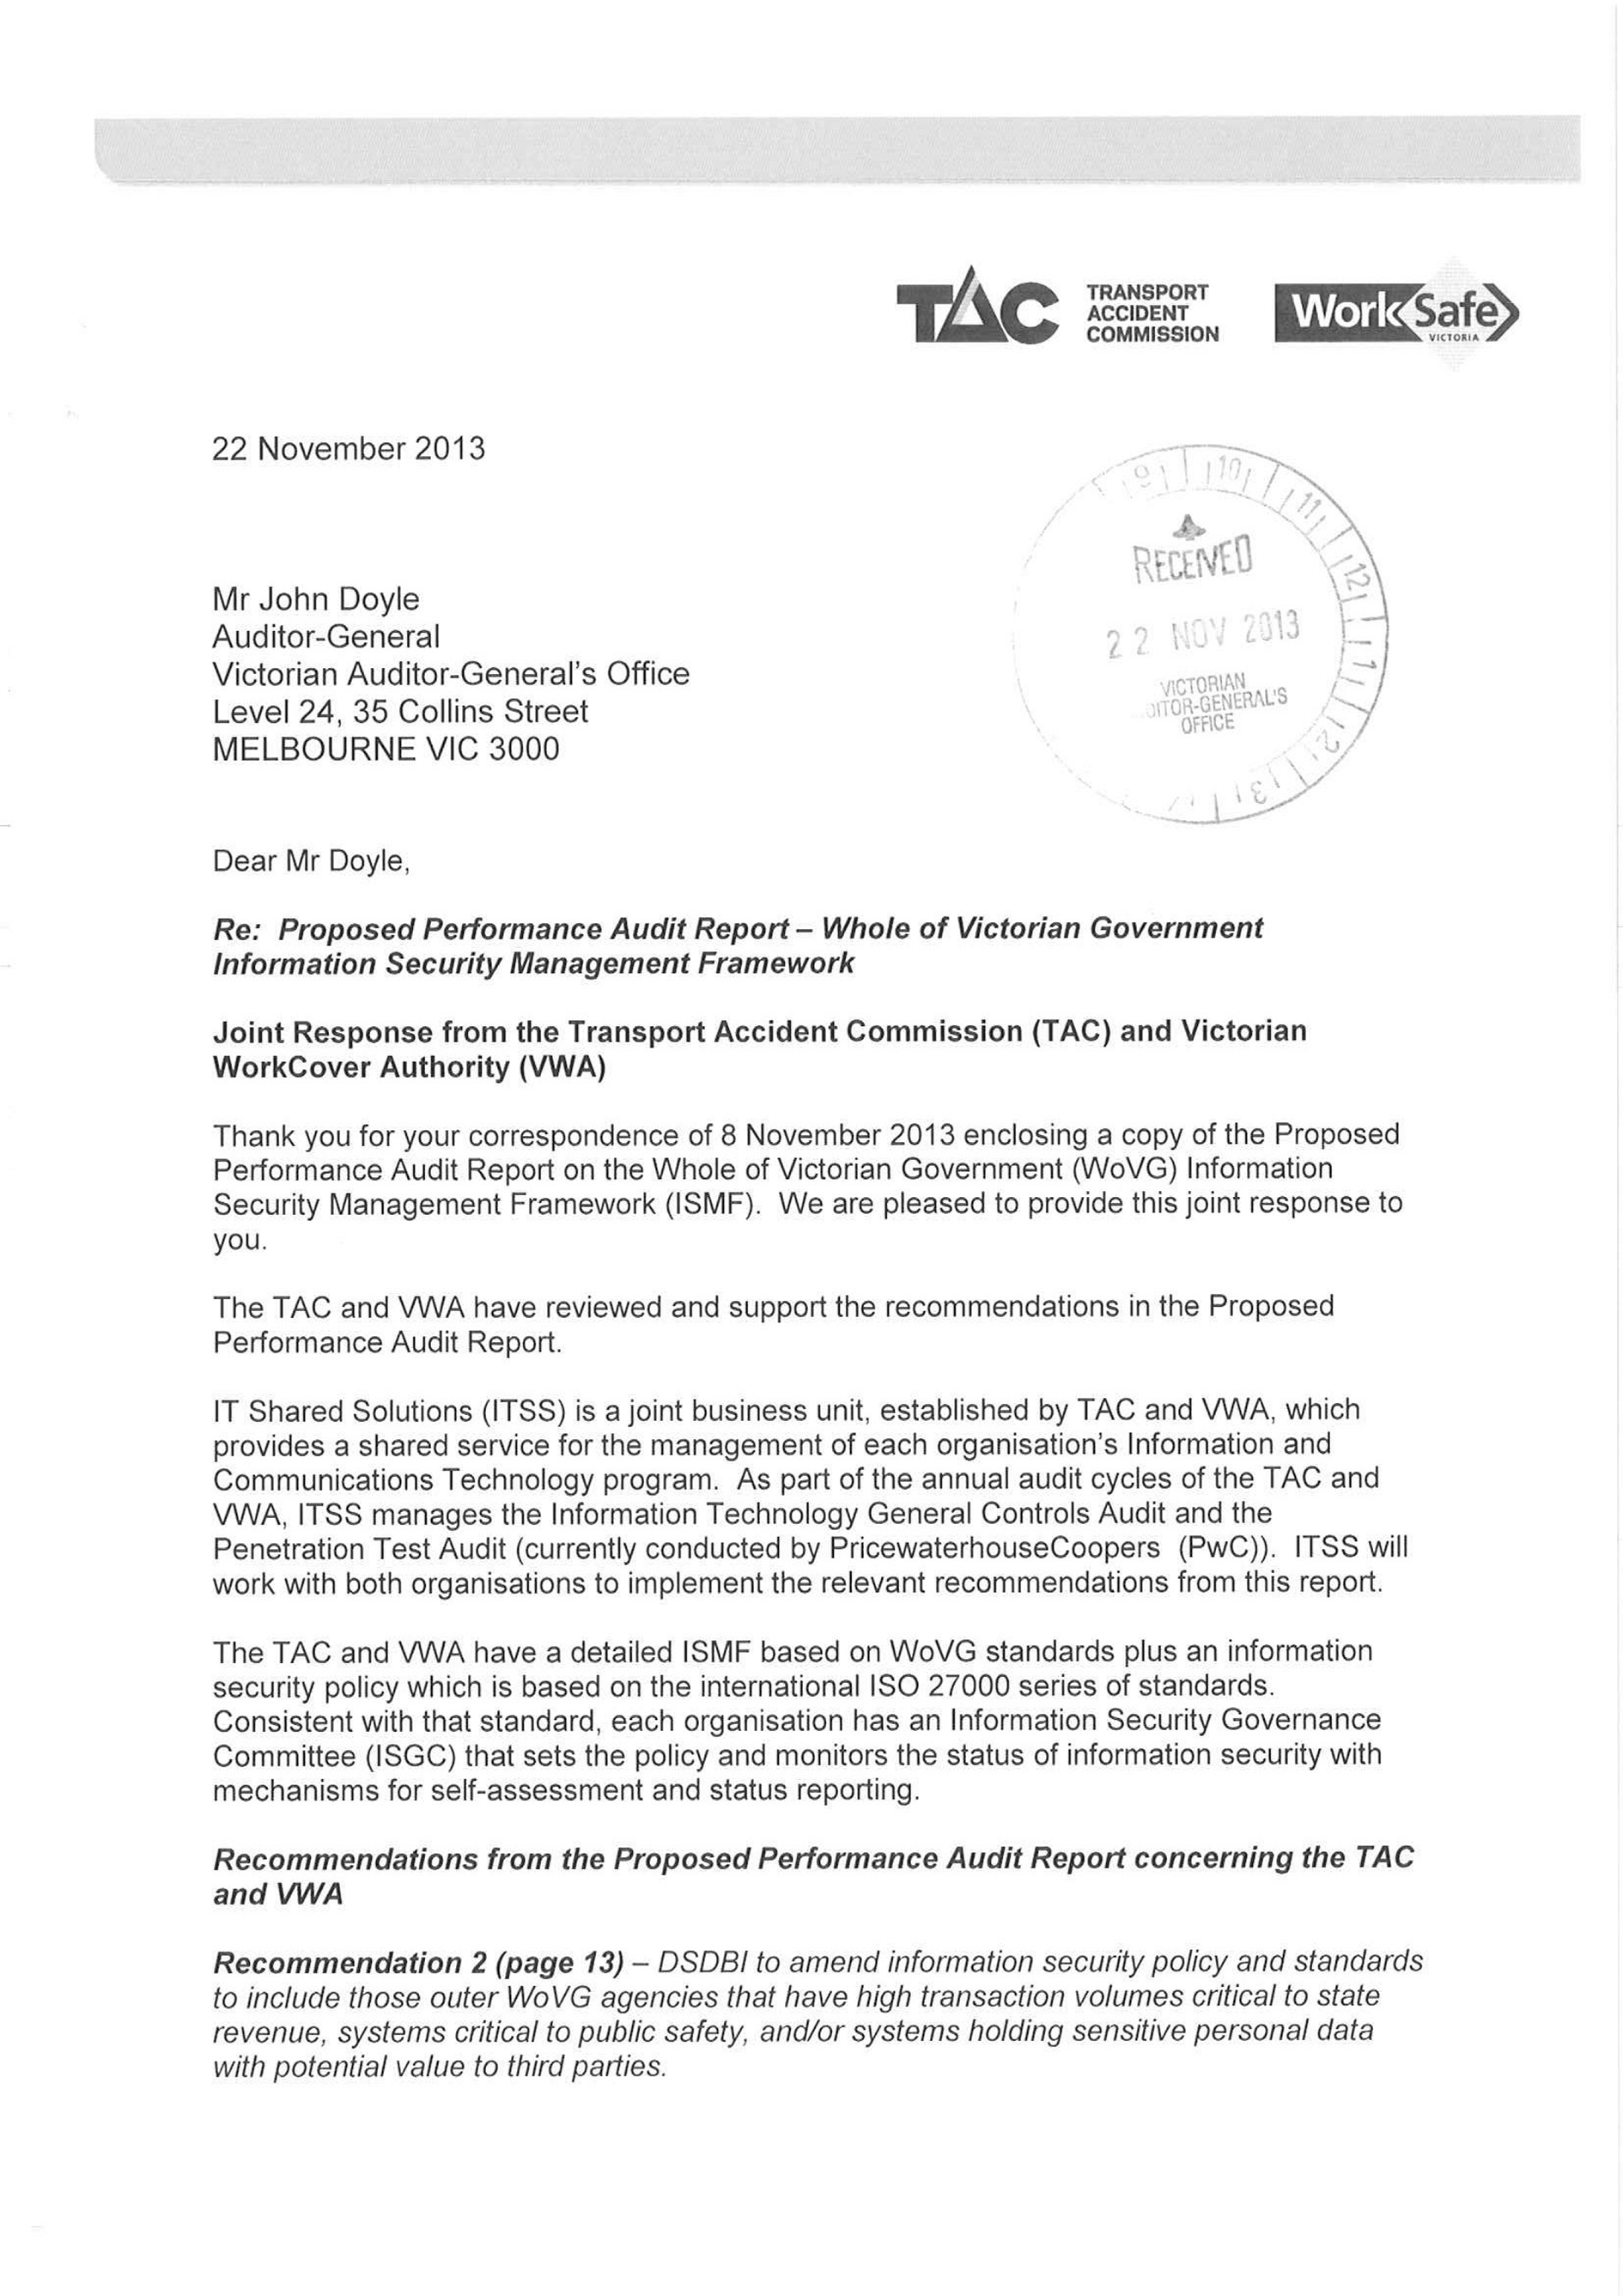 RESPONSE provided by the Chairperson, Transport Accident Commission and the Chairperson, Victorian WorkCover Authority